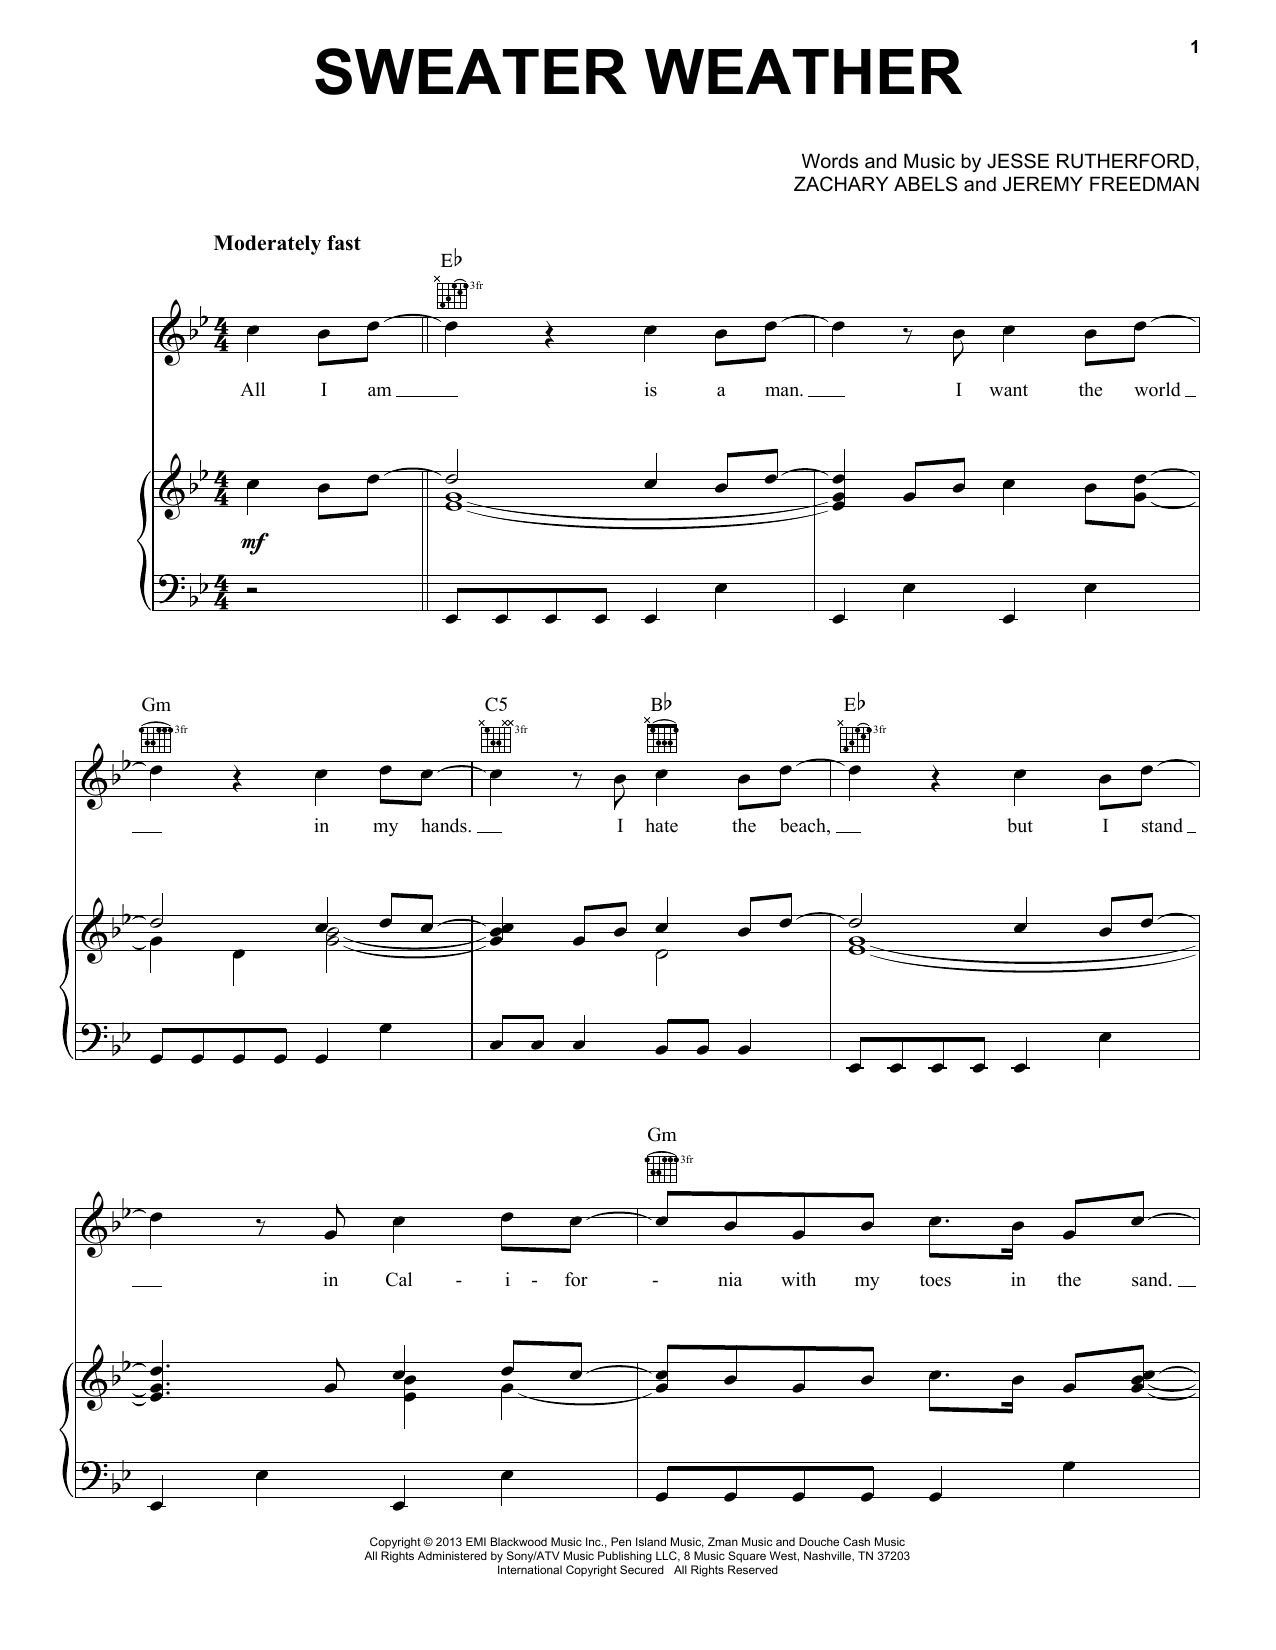 Neighbourhood "Sweater Weather" Sheet Music PDF Notes, Chords | Pop Score Piano, Vocal & Guitar Melody) Download Printable. SKU: 152203